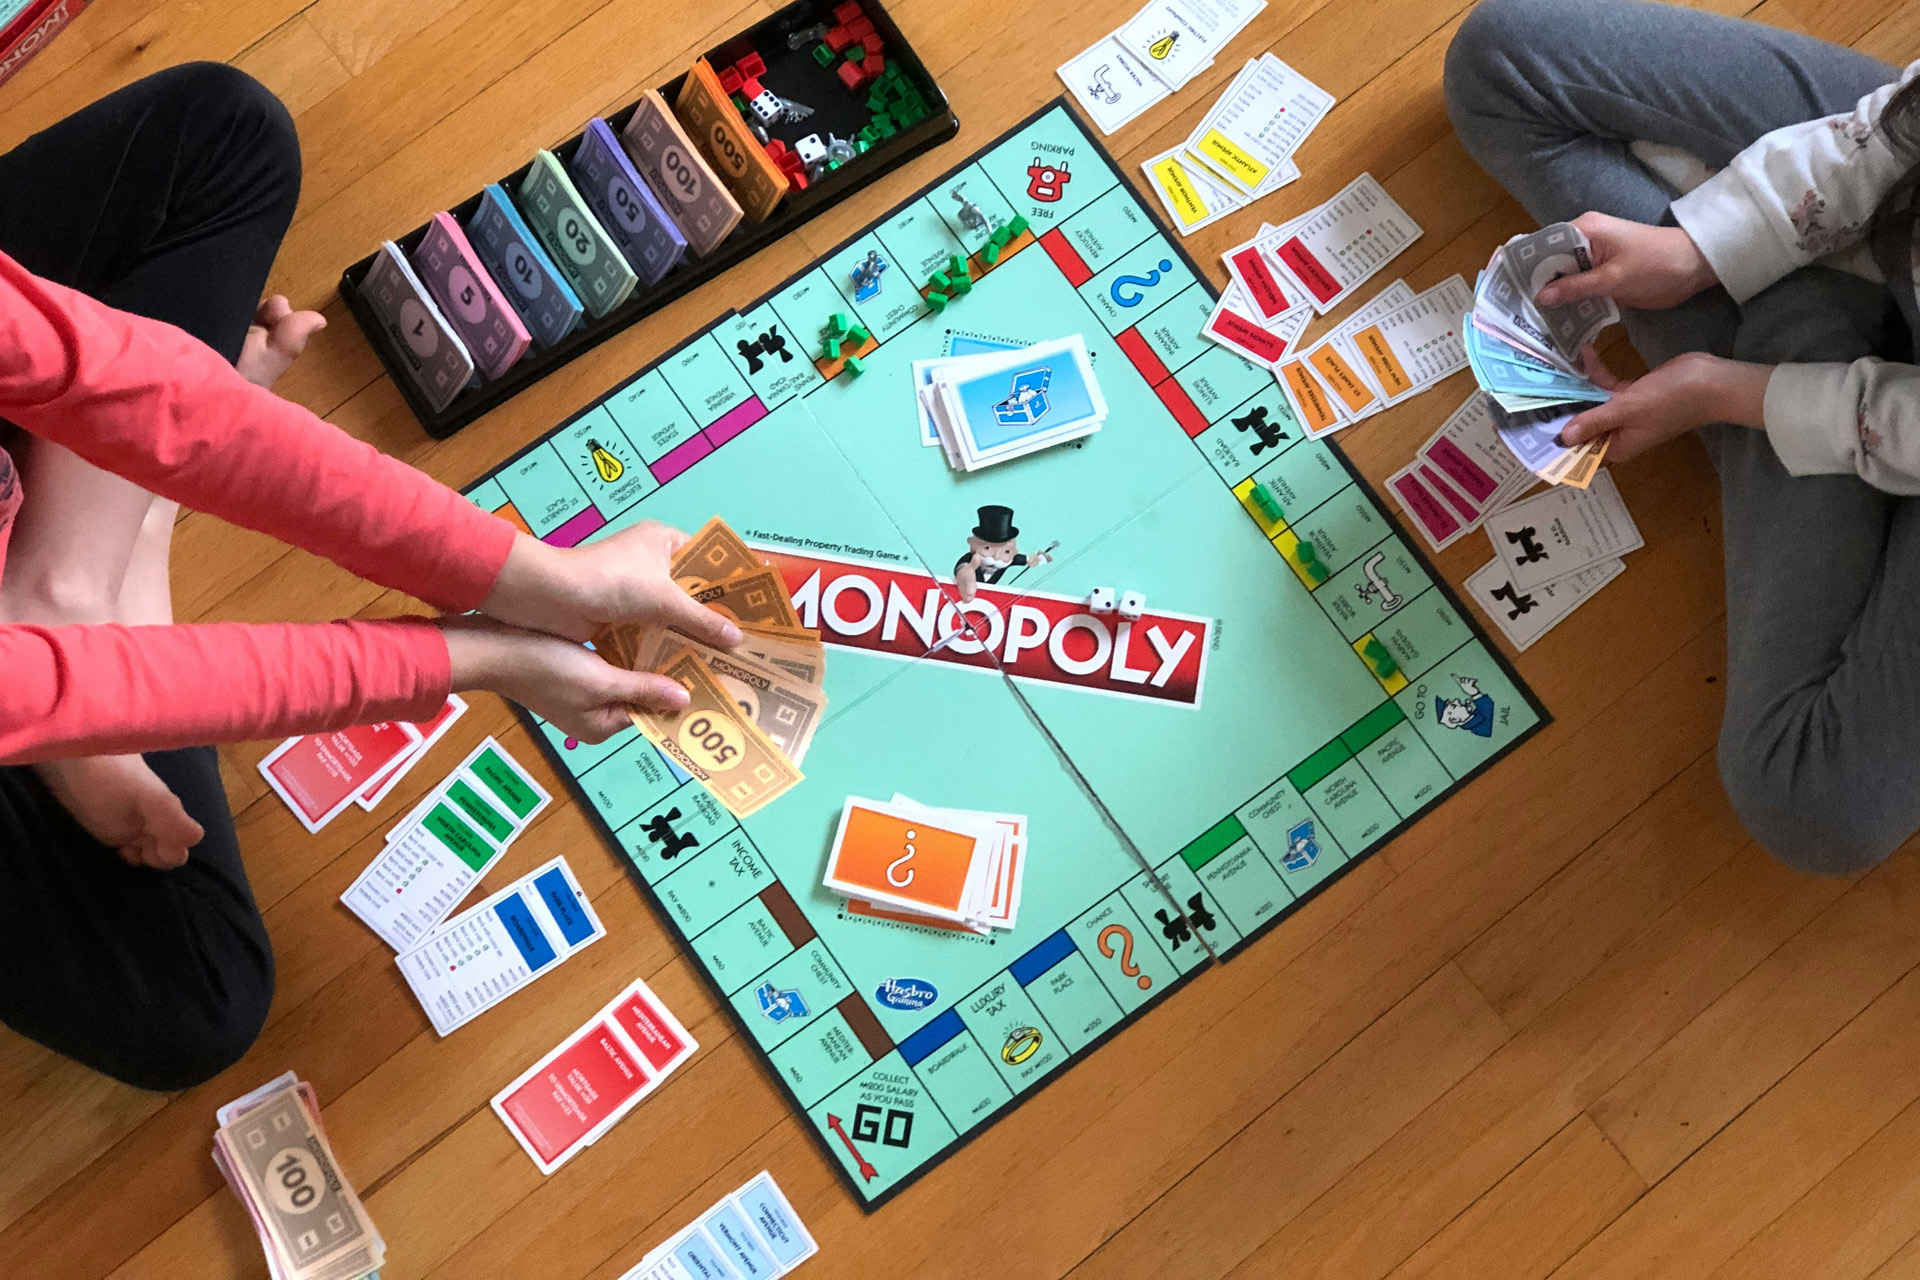 Do We Really Need A Monopoly Movie?